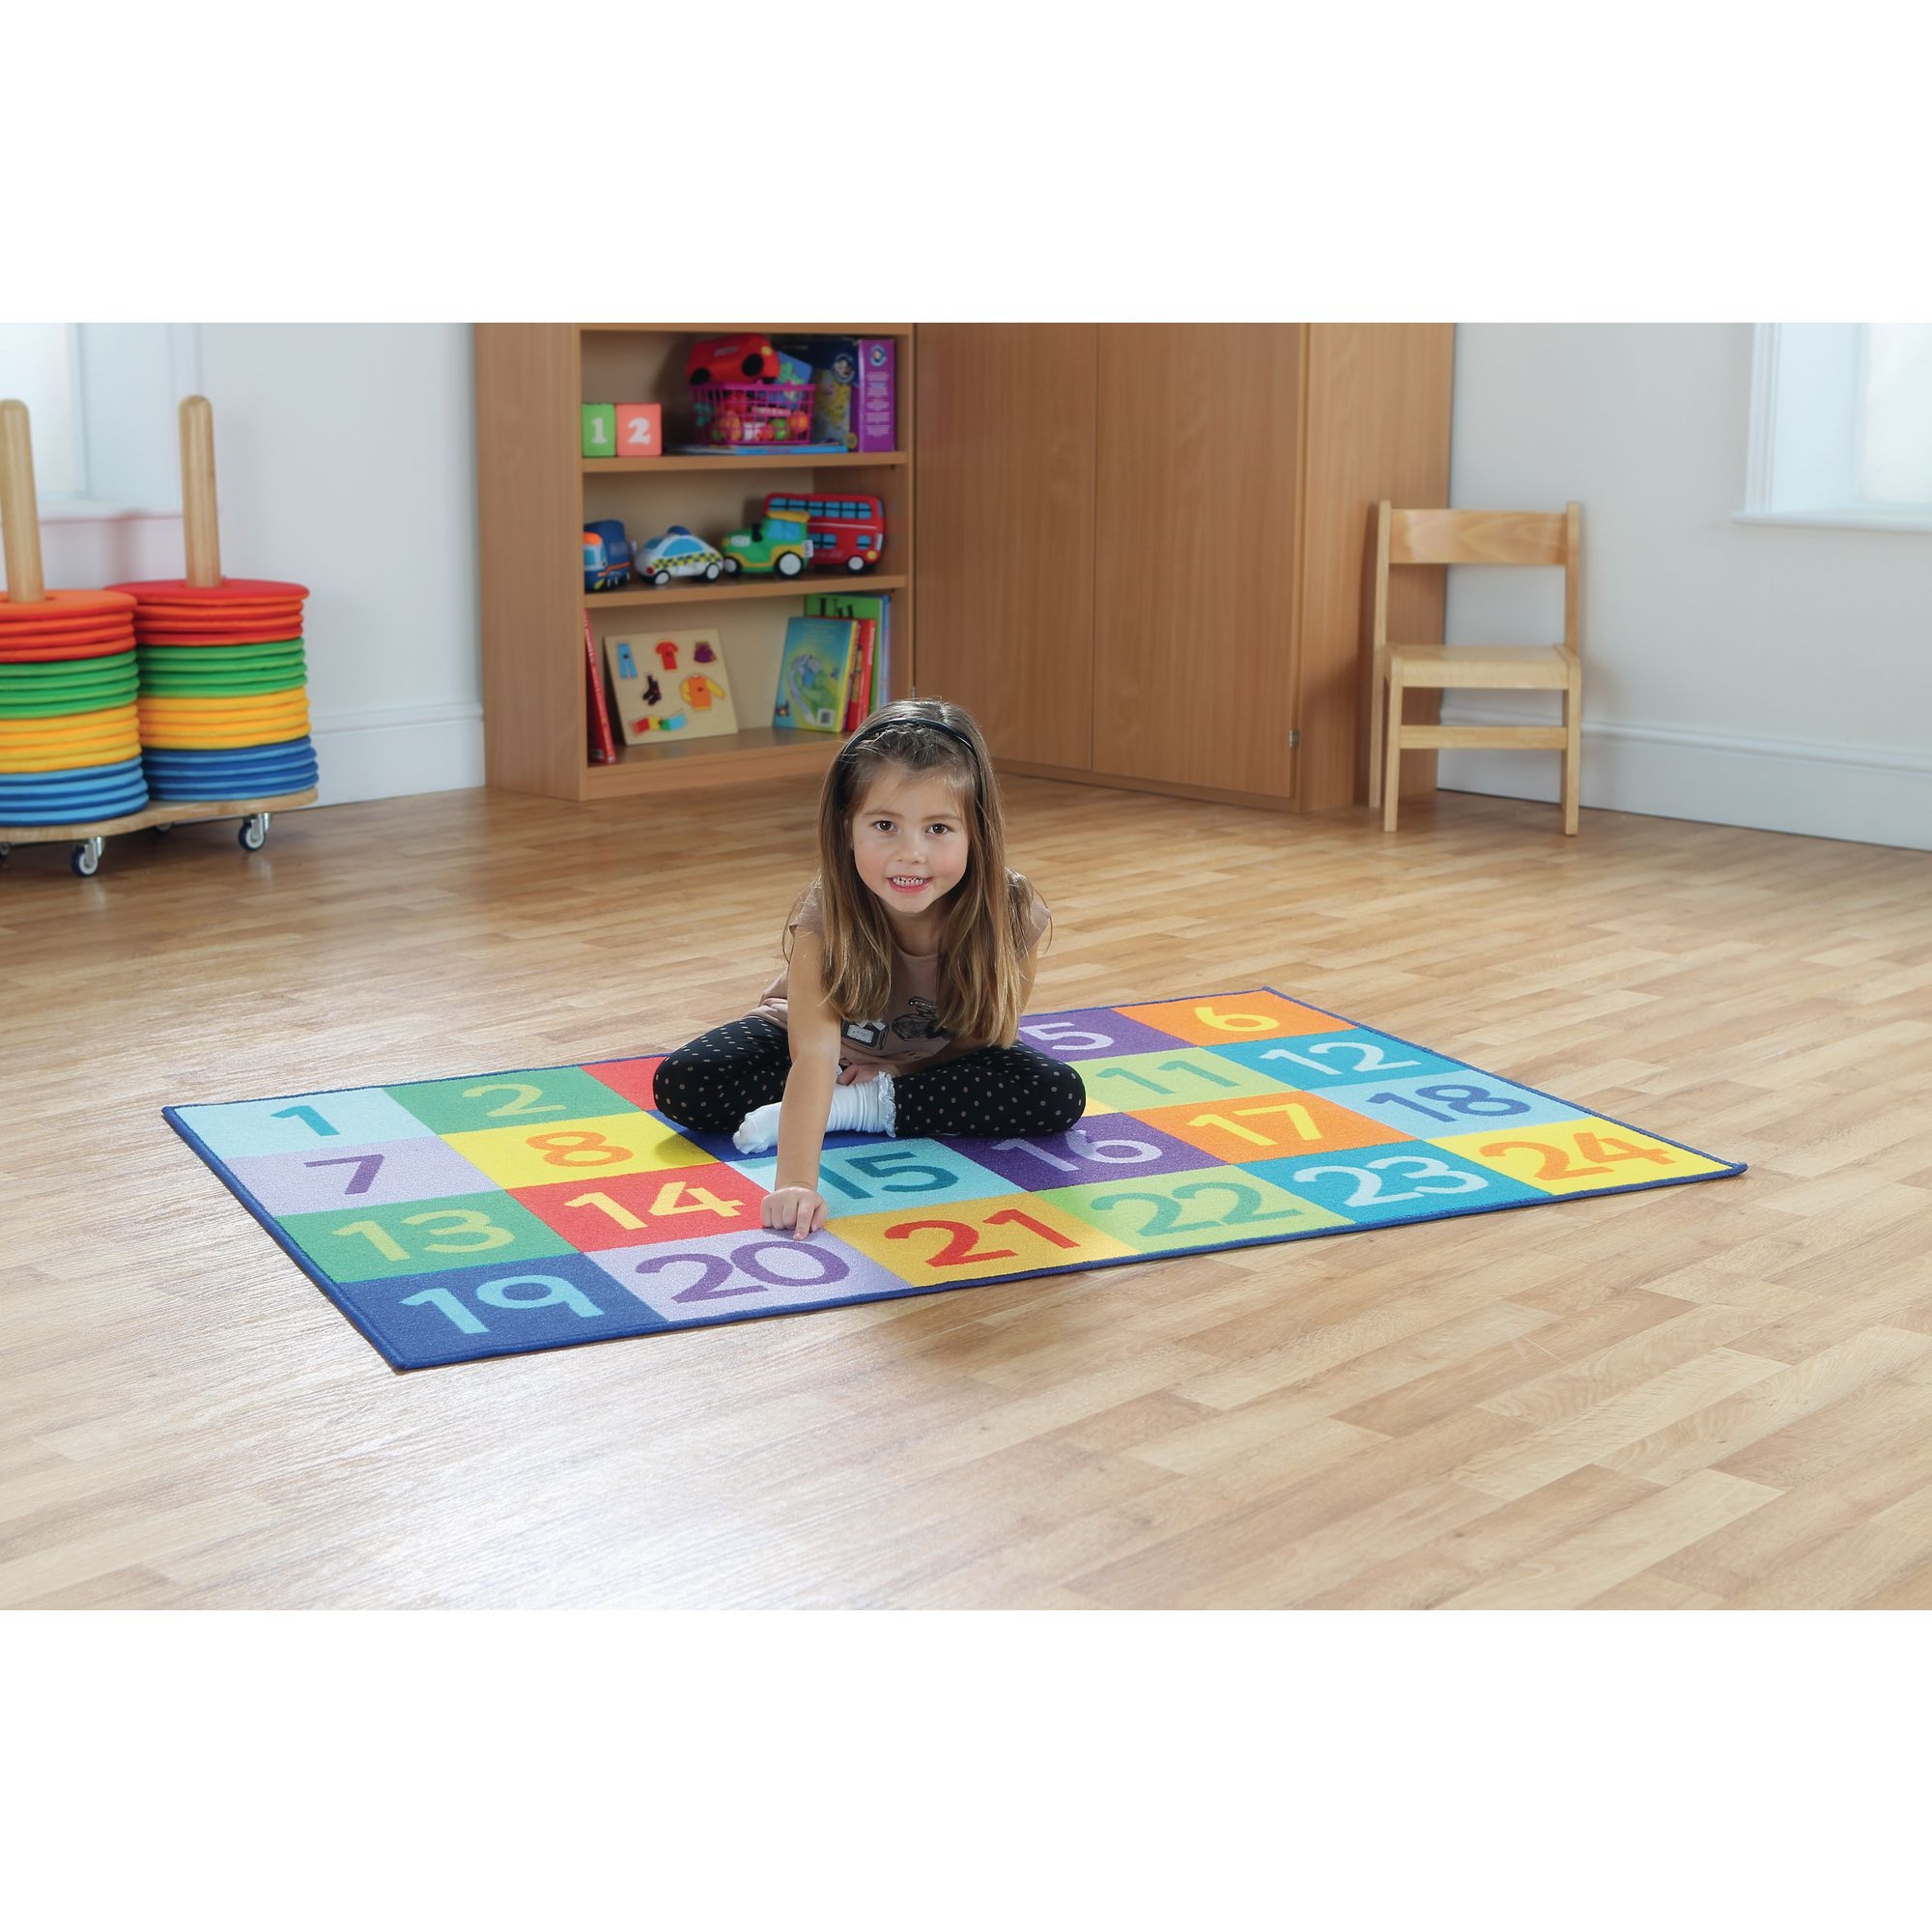 Rainbow 1 to 24 Numbers Mat